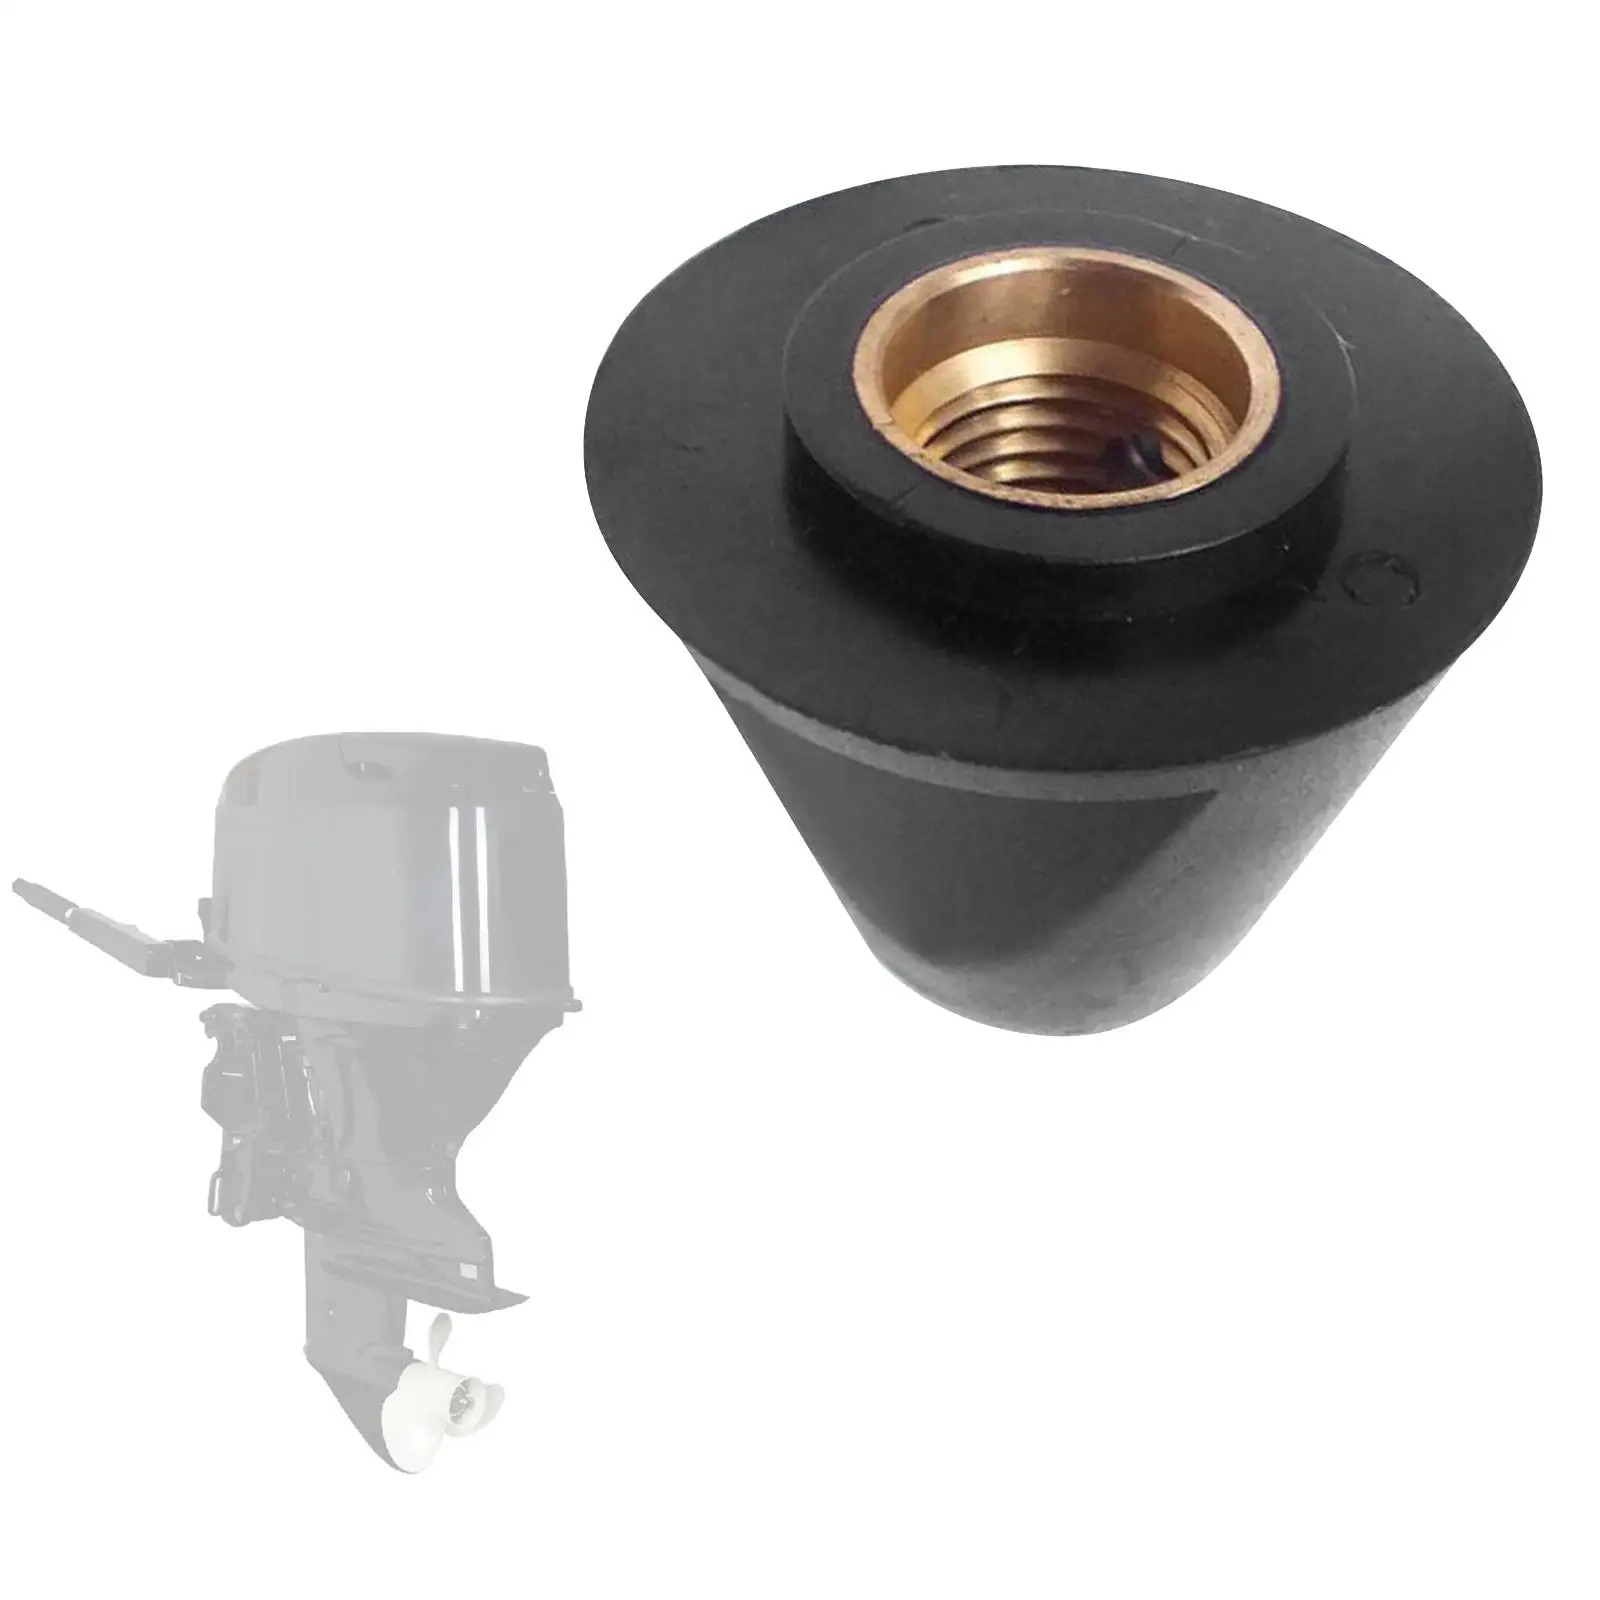 Propeller Prop Nut Spare Parts for Yamaha Outboard 4HP 5HP 2 Stroke High Performance Easily to Install